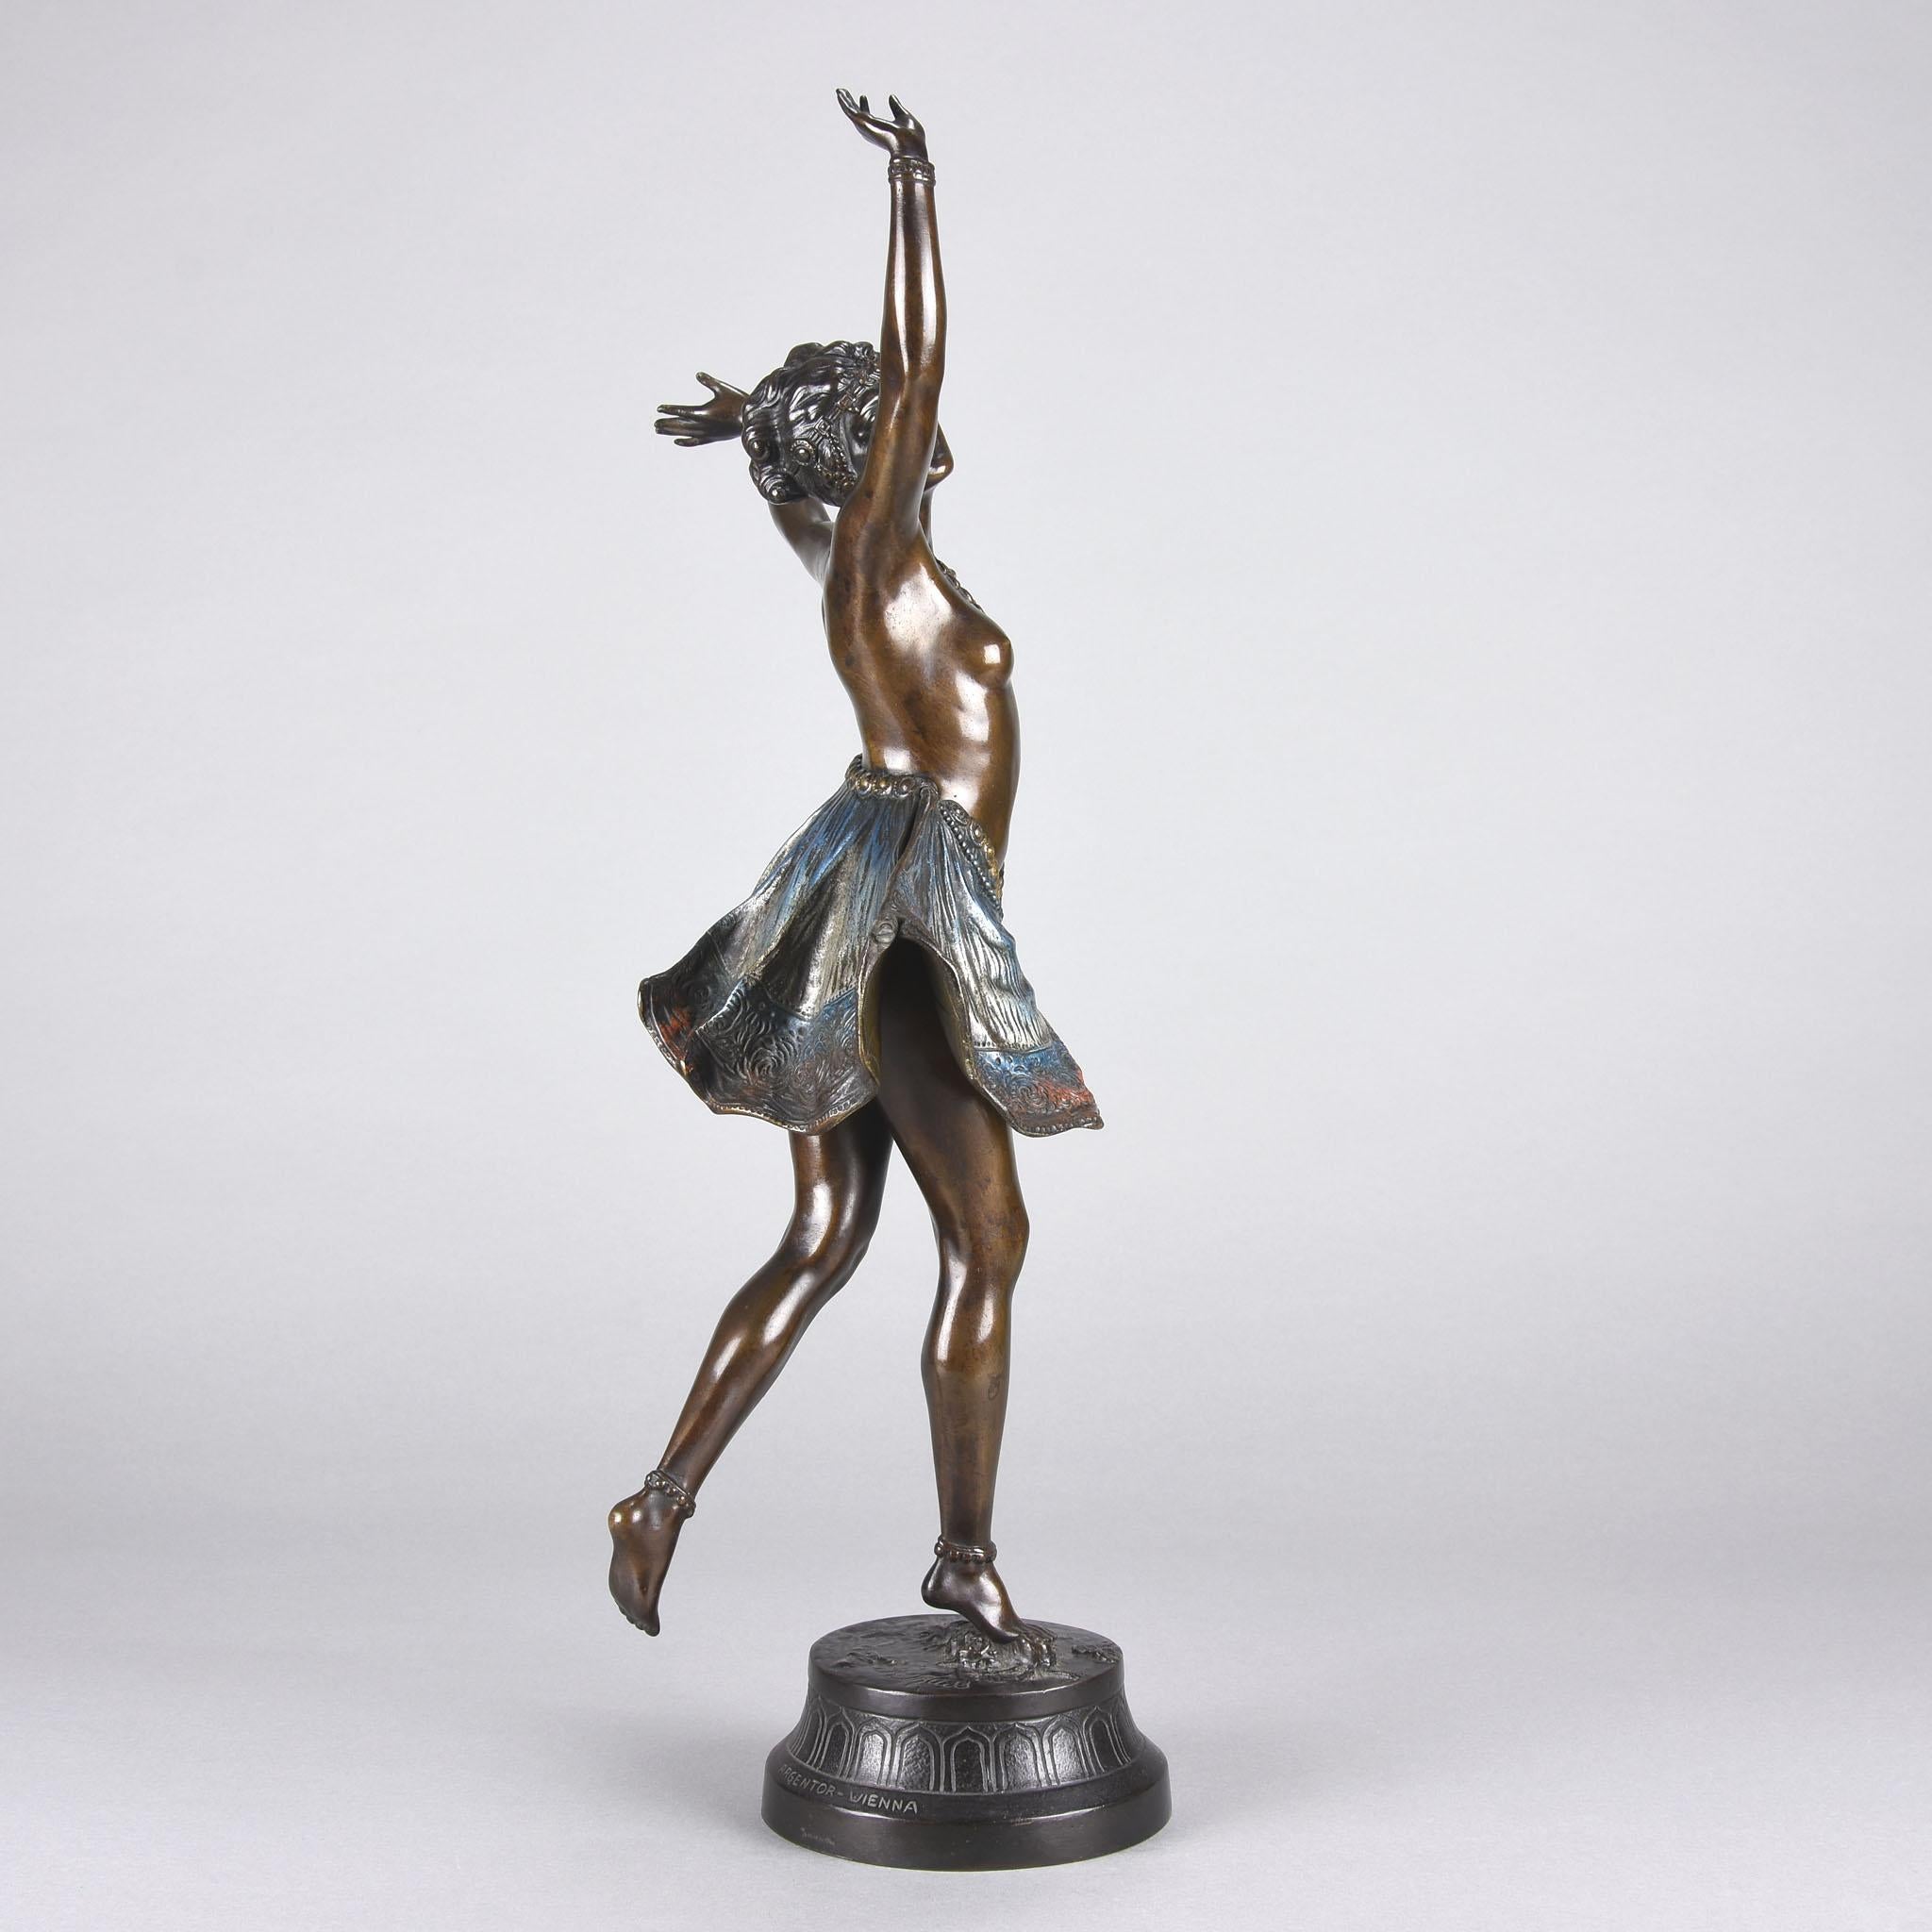 A beautiful early 20th century cold painted Austrian bronze study of young semi clad dancer wearing only a skirt which is mechanically hinged to reveal her naked body creating the illusion of butterfly wings. Raised on a decorative bronze base,